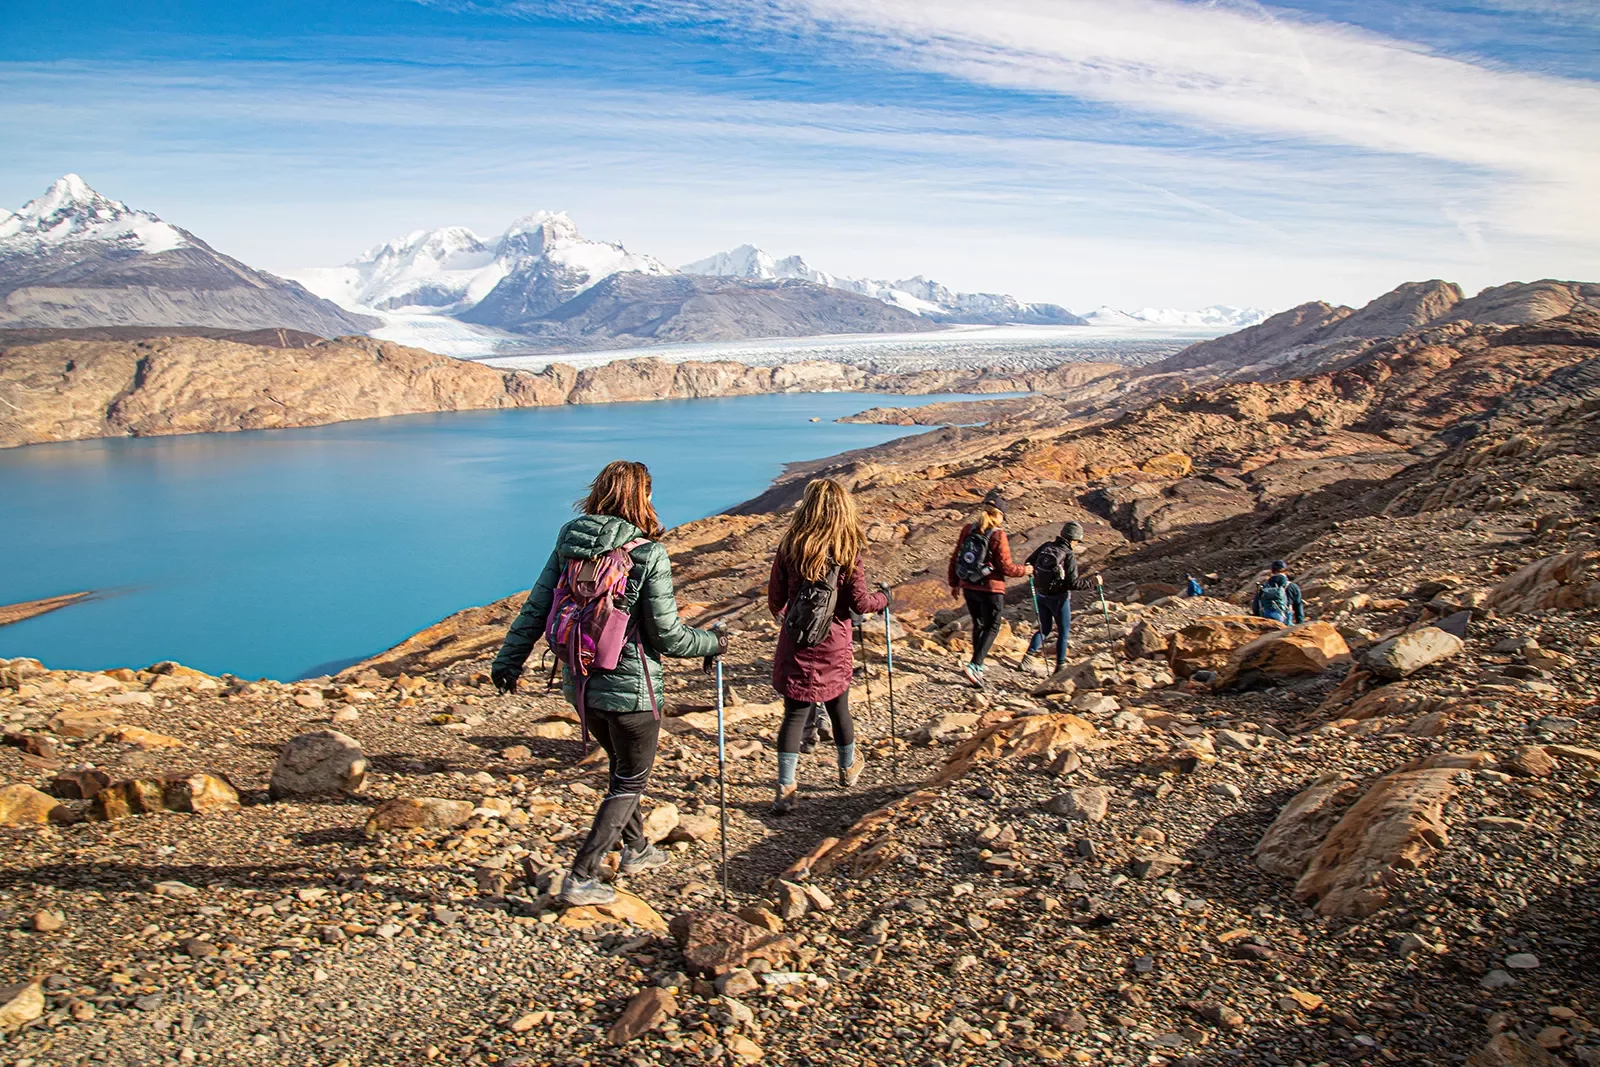 Group of guests walking towards blue lake, snowy mountains in distance.